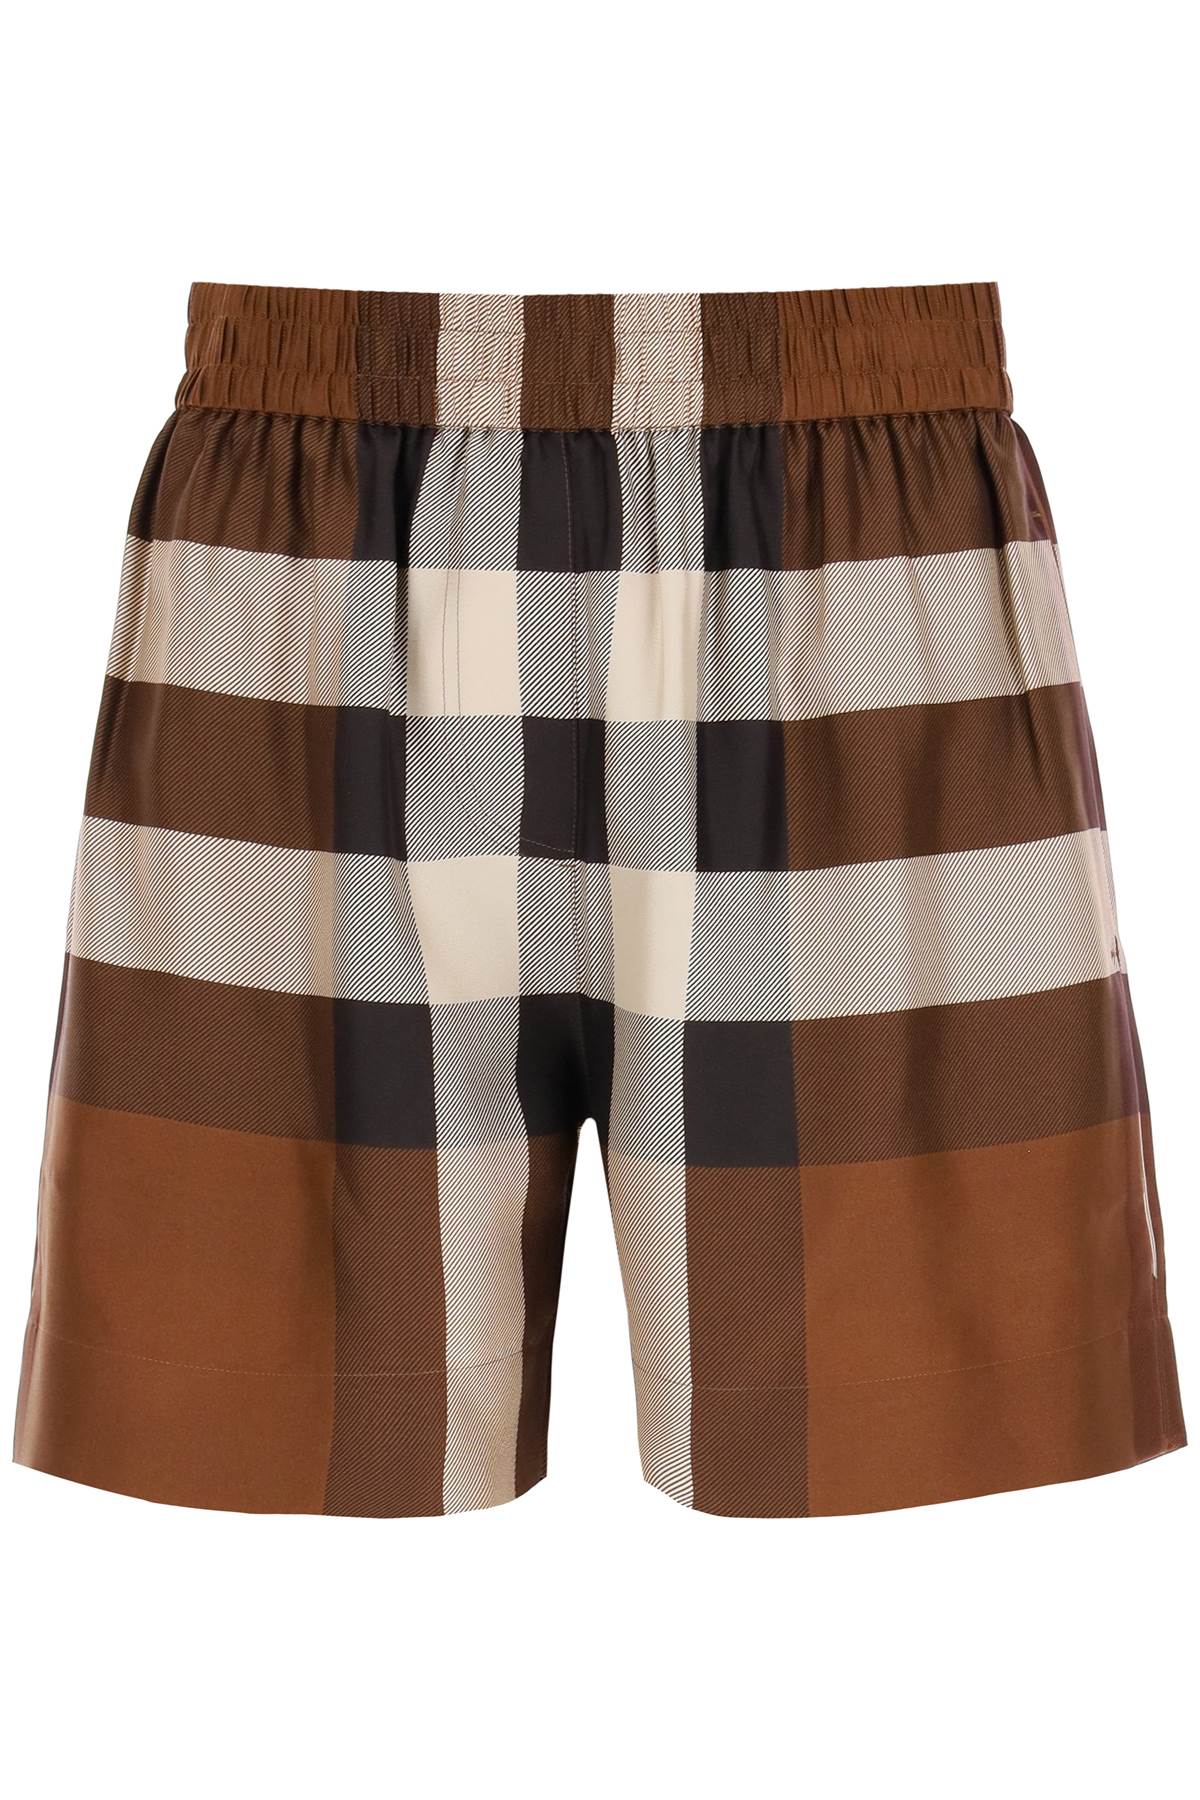 Burberry exploded check silk shorts-Burberry-10-Brown-Urbanheer